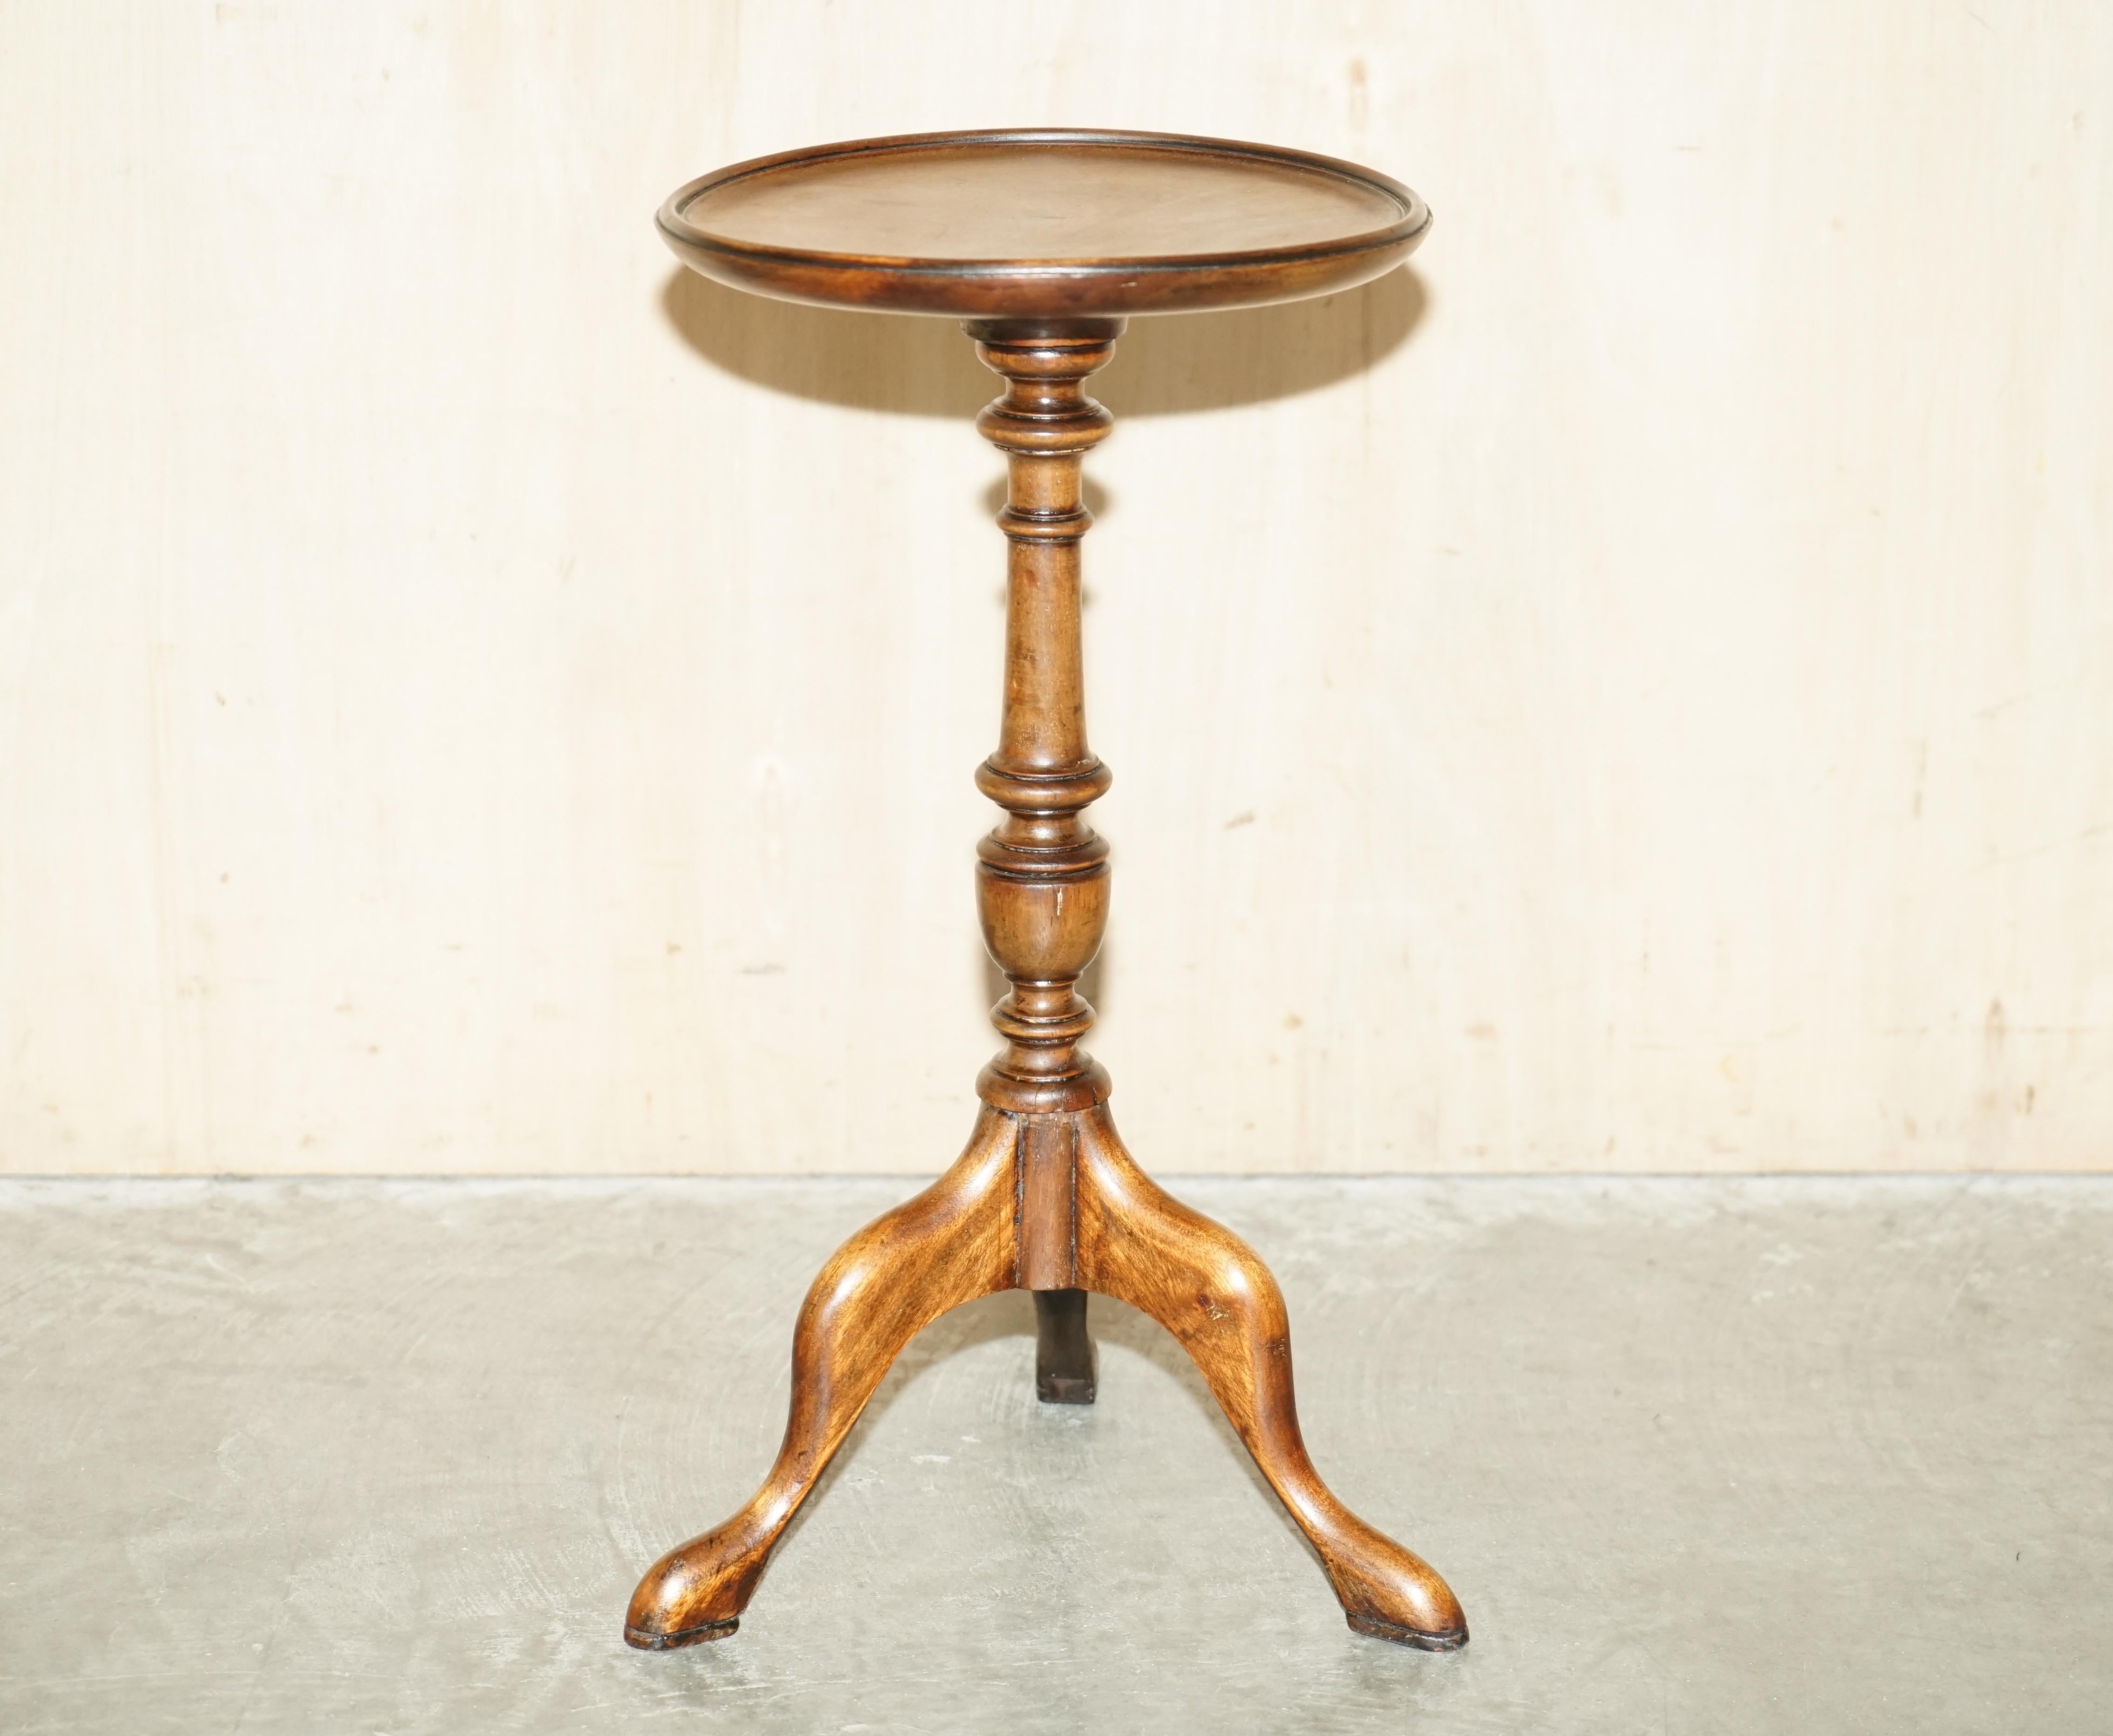 We are delighted to offer for sale this vintage Mahogany lamp or side table with nicely turned column base.

A good-looking well-made tripod, we have cleaned waxed and polished it from top to bottom, there will be normal patina marks from honest